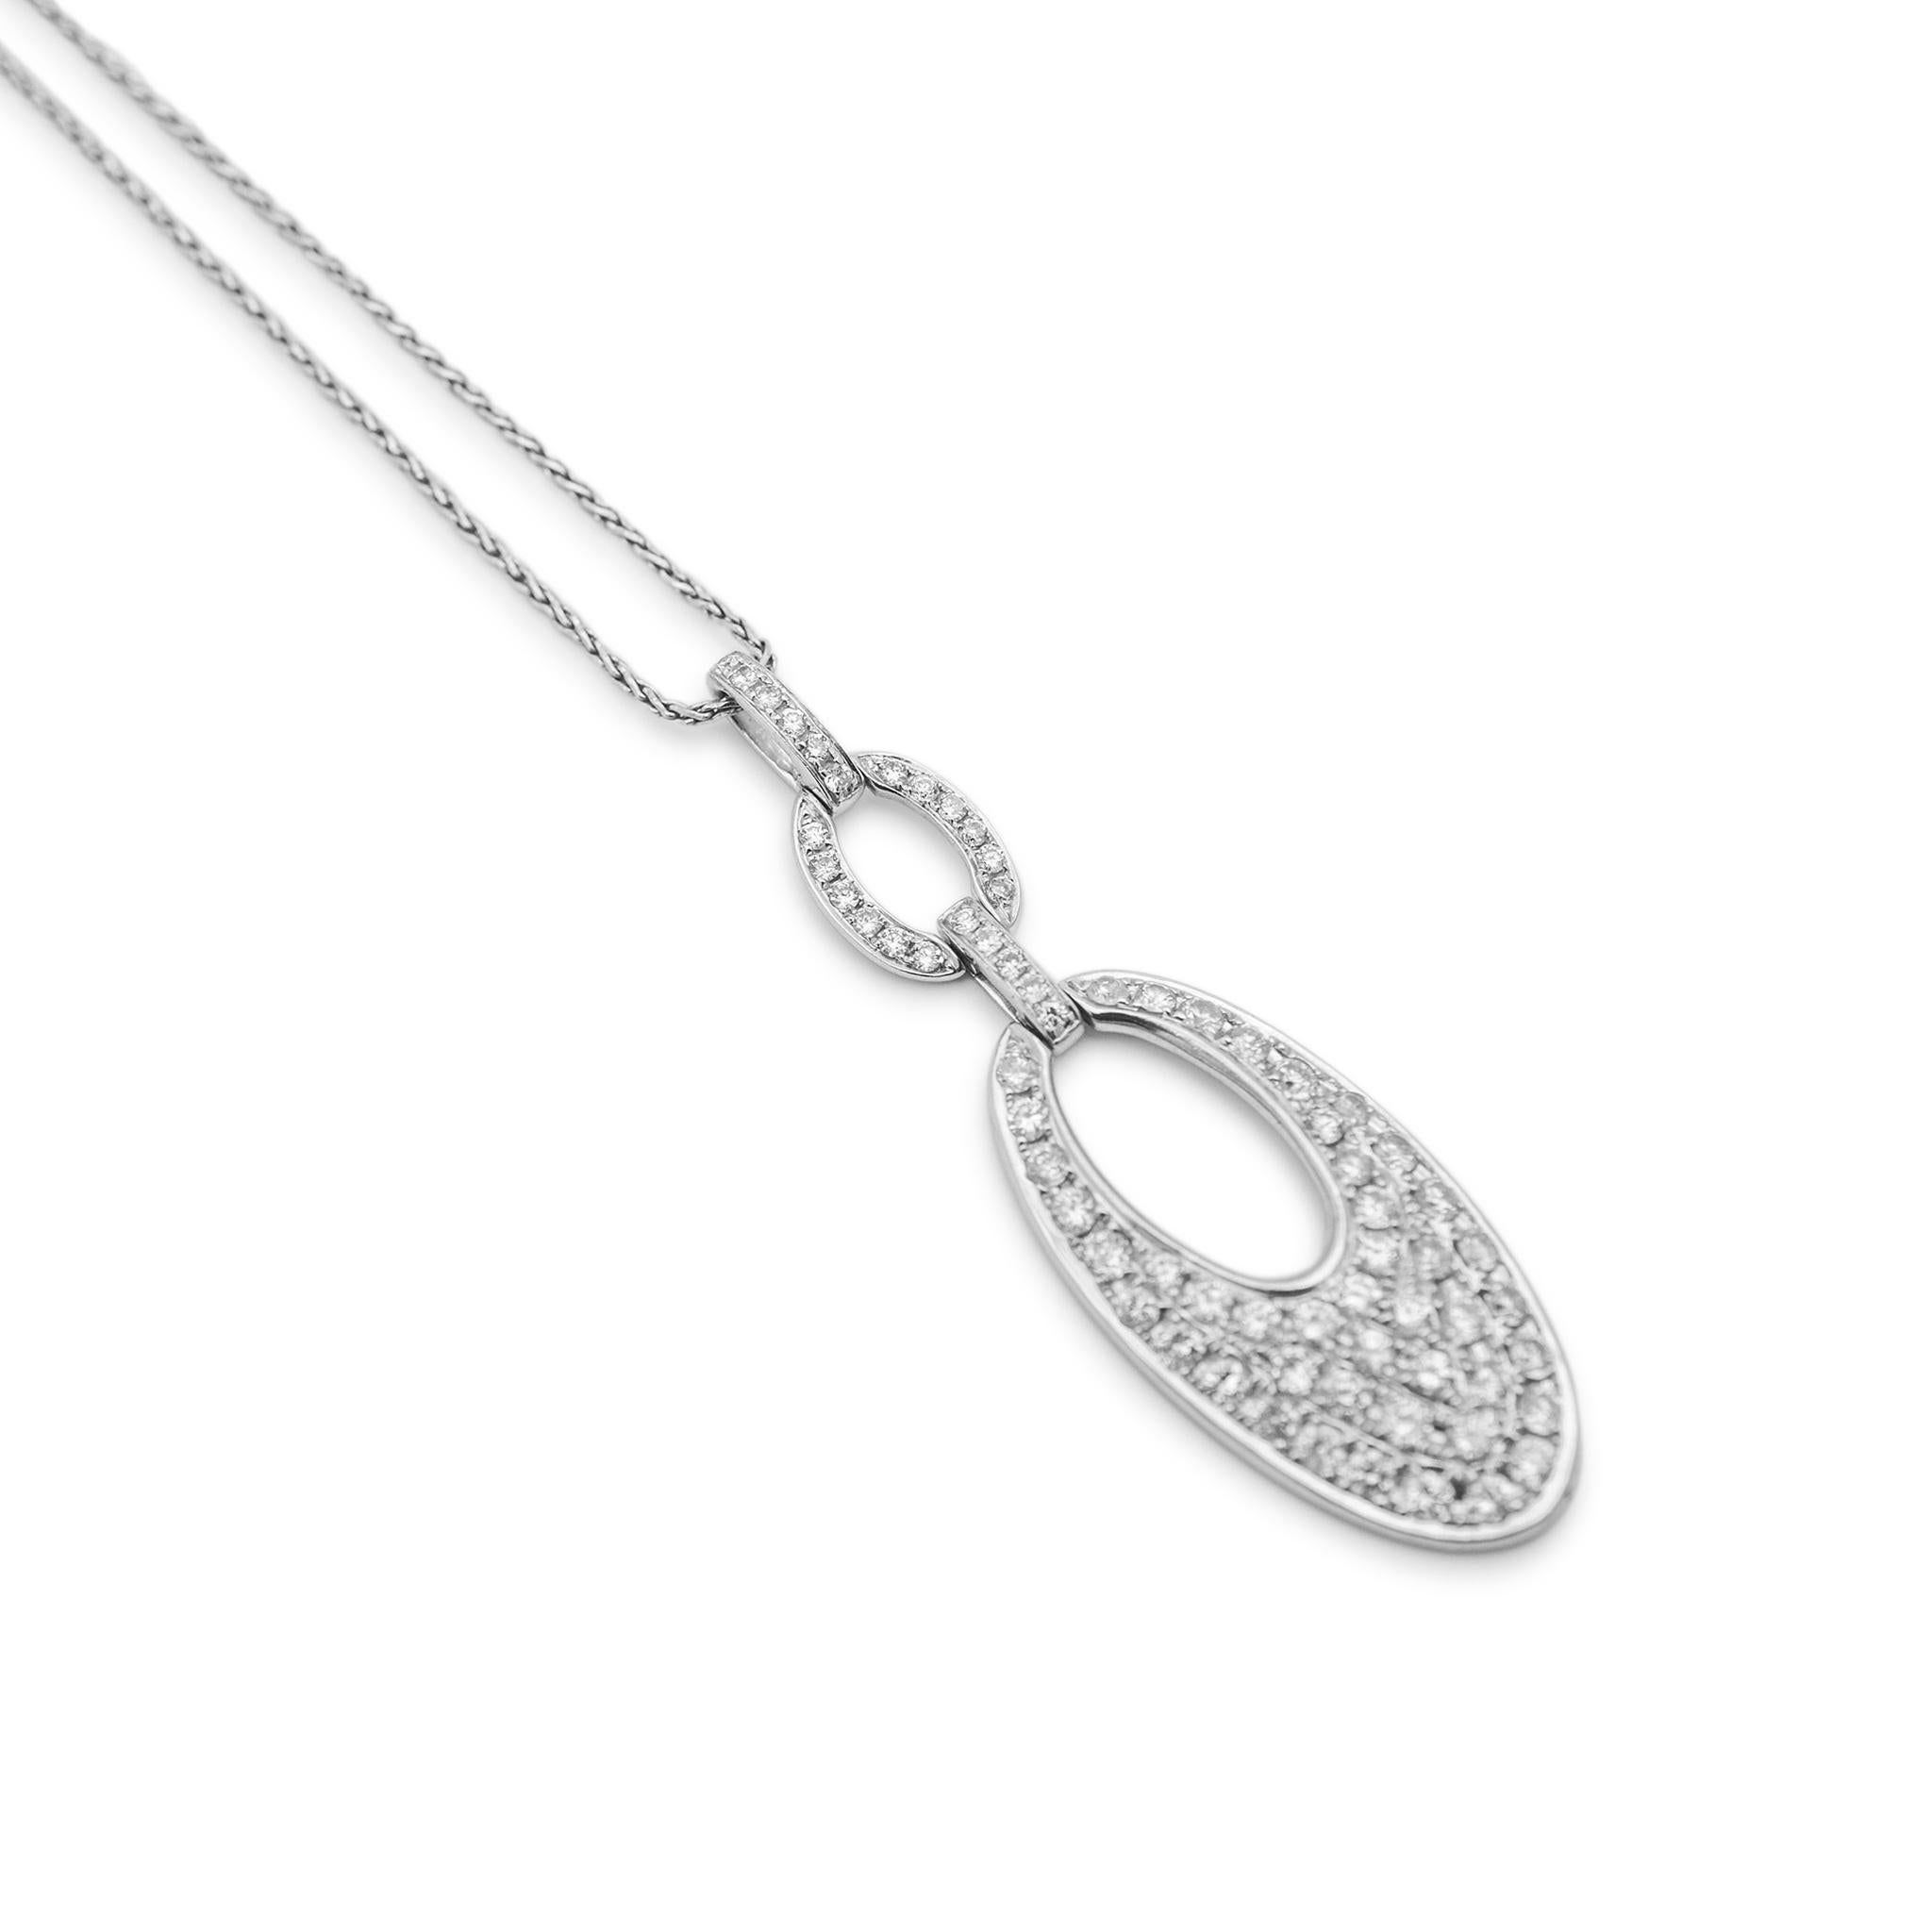 Ladies Vintage 14K White Gold Diamond Open Oval Pendant Necklace In Excellent Condition For Sale In Houston, TX